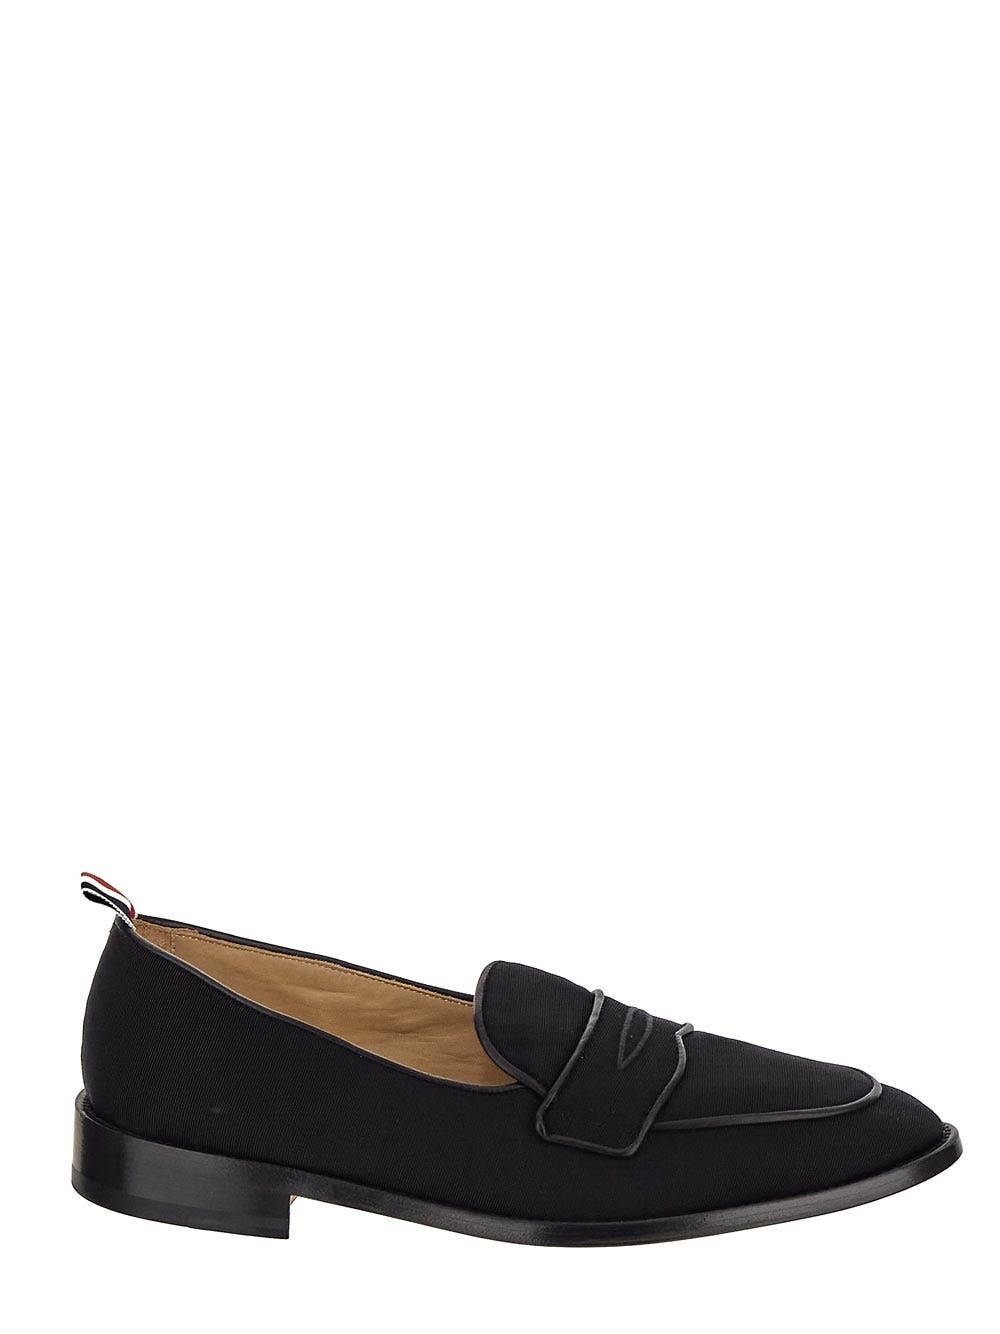 Photo: Thom Browne Varsity Penny Loafers